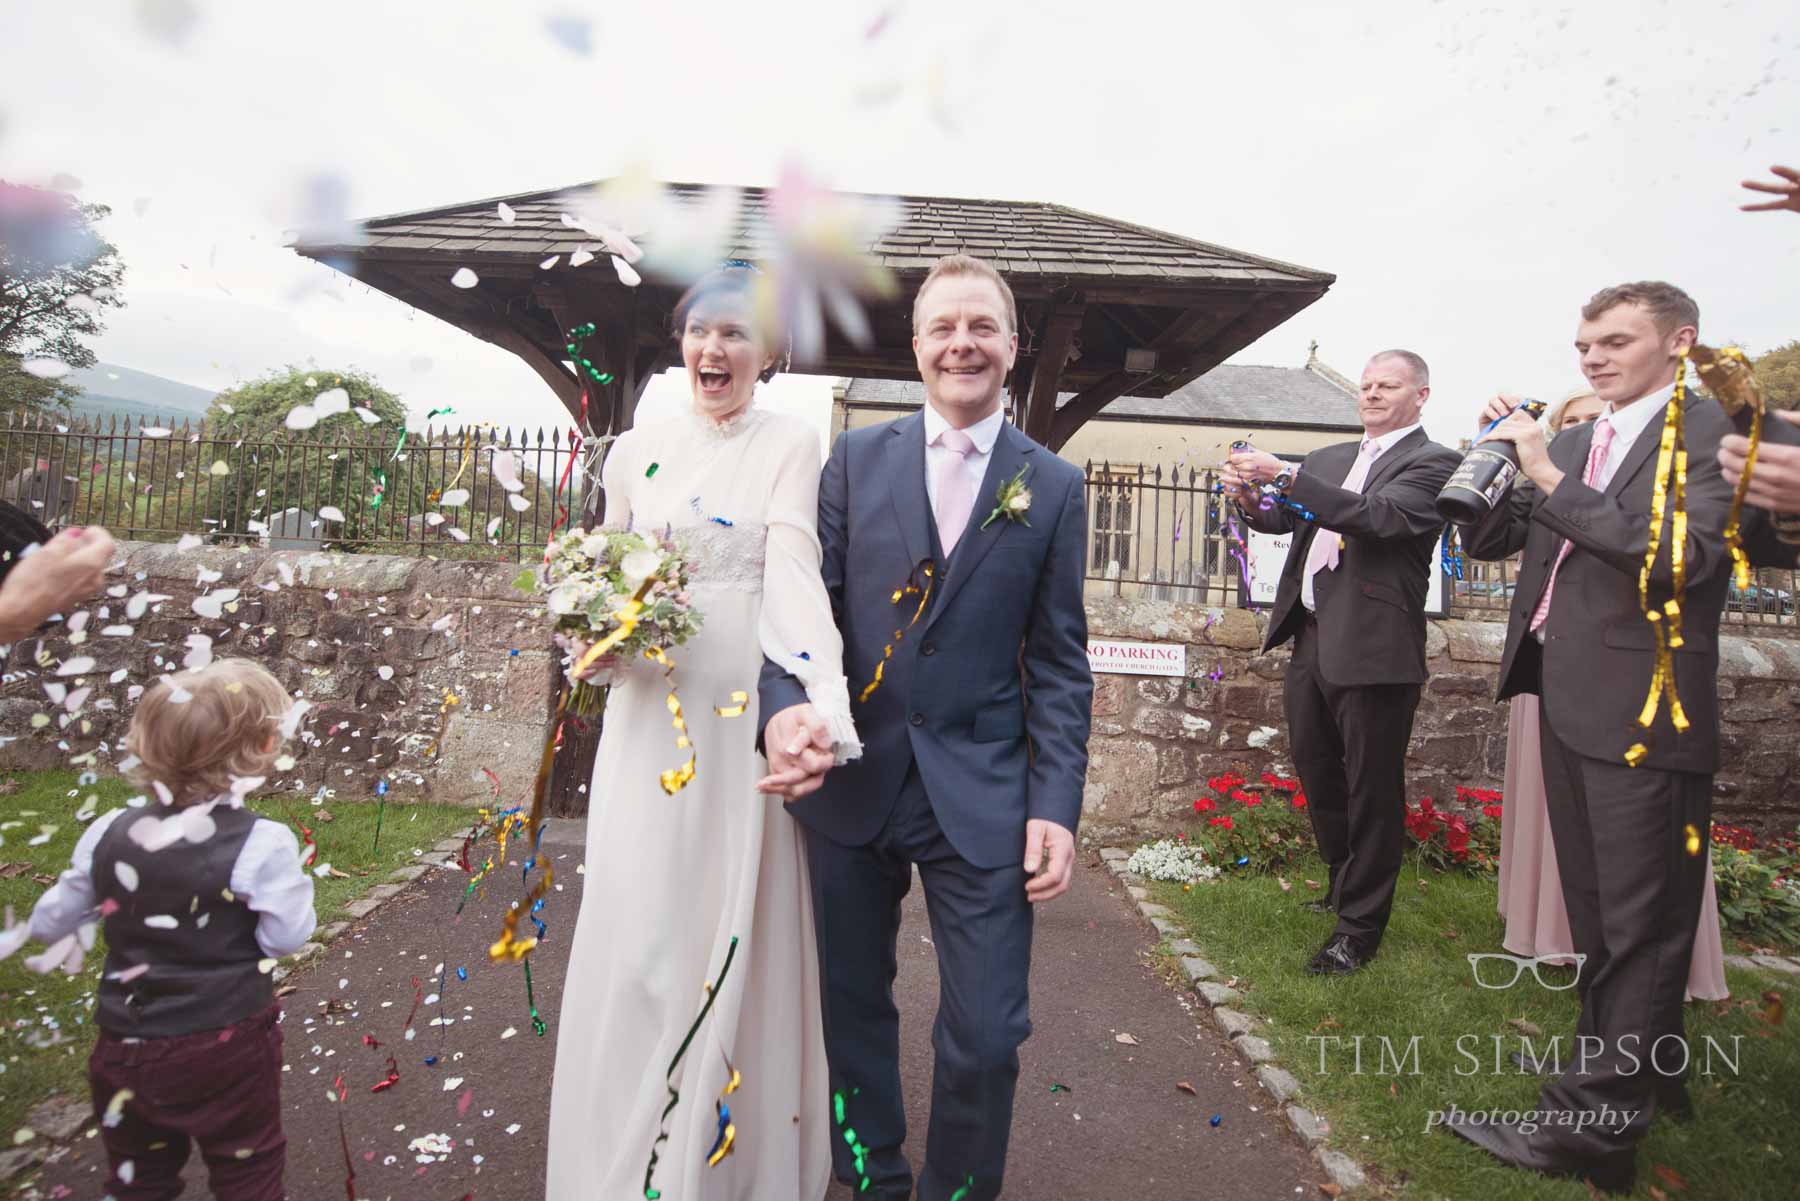 Inn at Whitewell wedding photography (17 of 24)